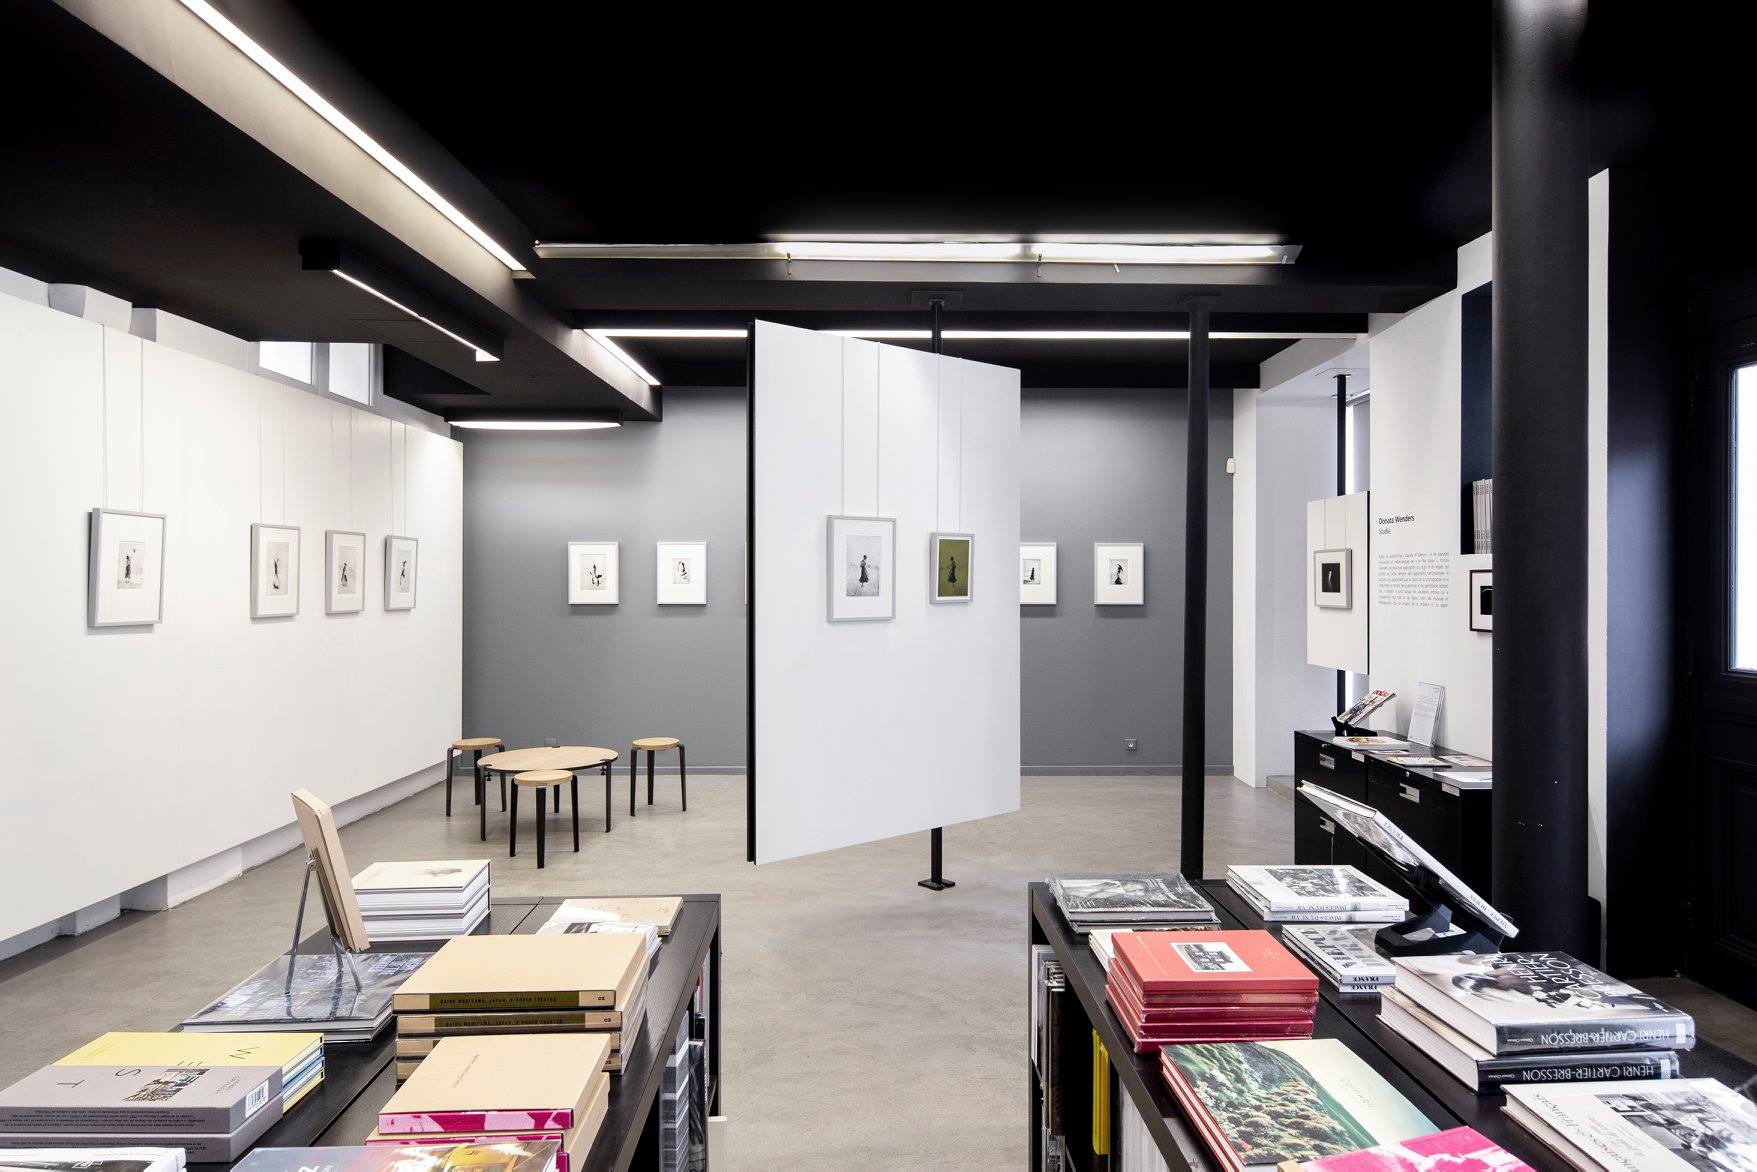 Polka Galerie, an innovative concept devoted to photography